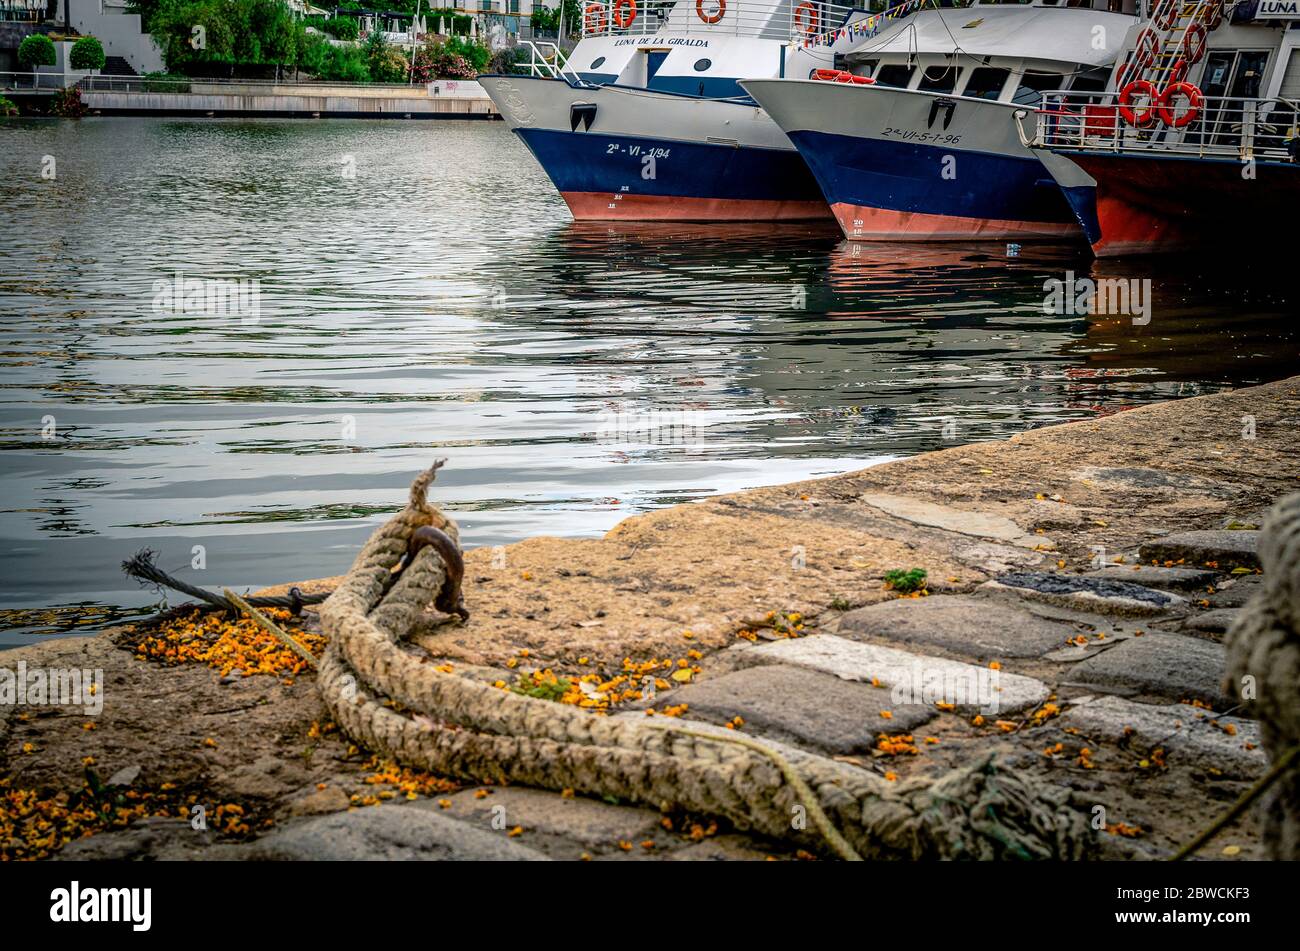 Moored touristic boats in Seville, Andalusia, Spain after Coronavirus lockdown Stock Photo